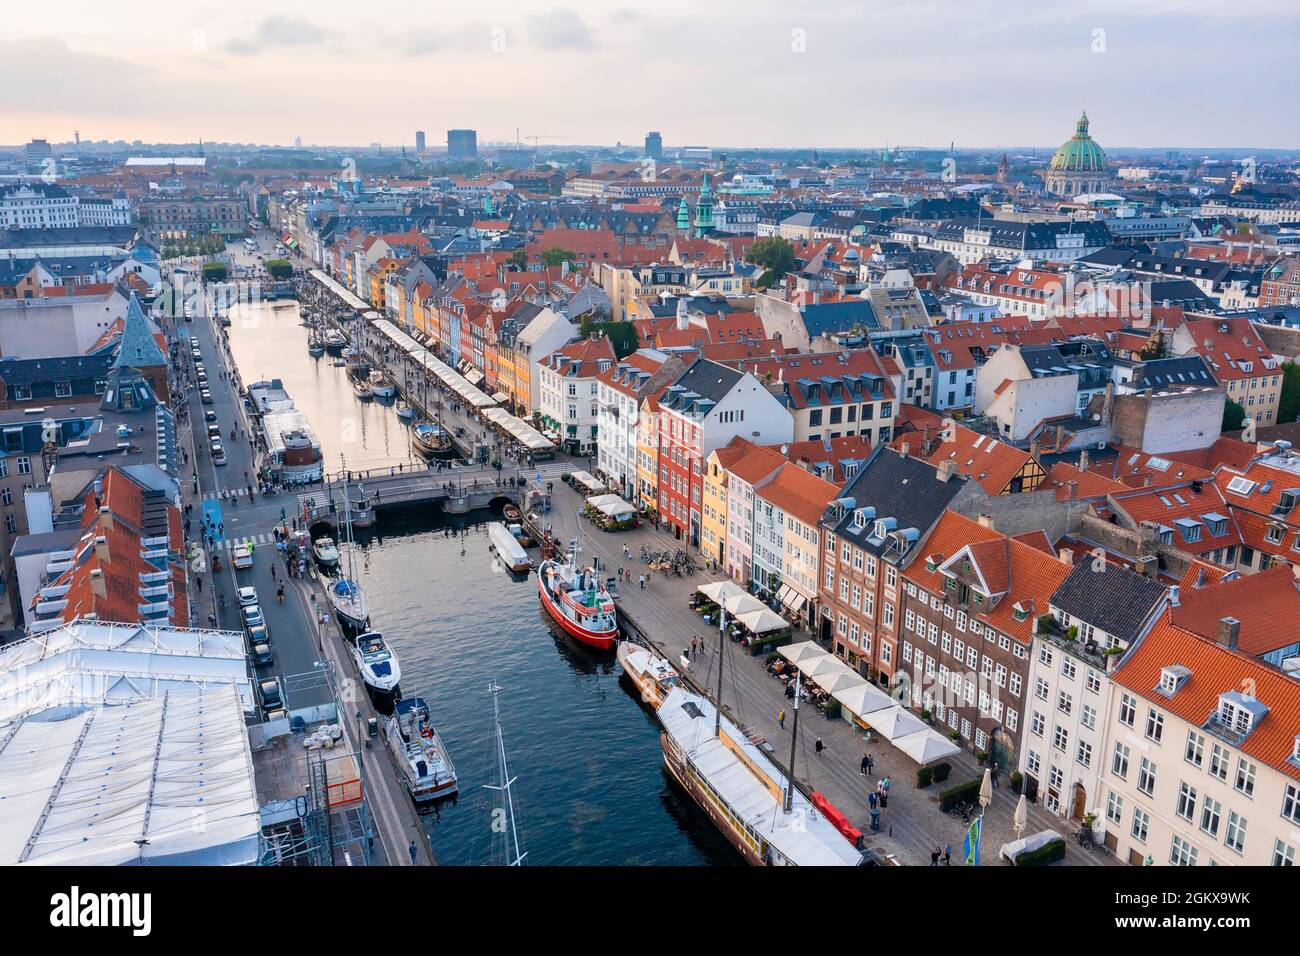 Famous Nyhavn pier with colorful buildings and boats in Copenhagen, Denmark. Stock Photo